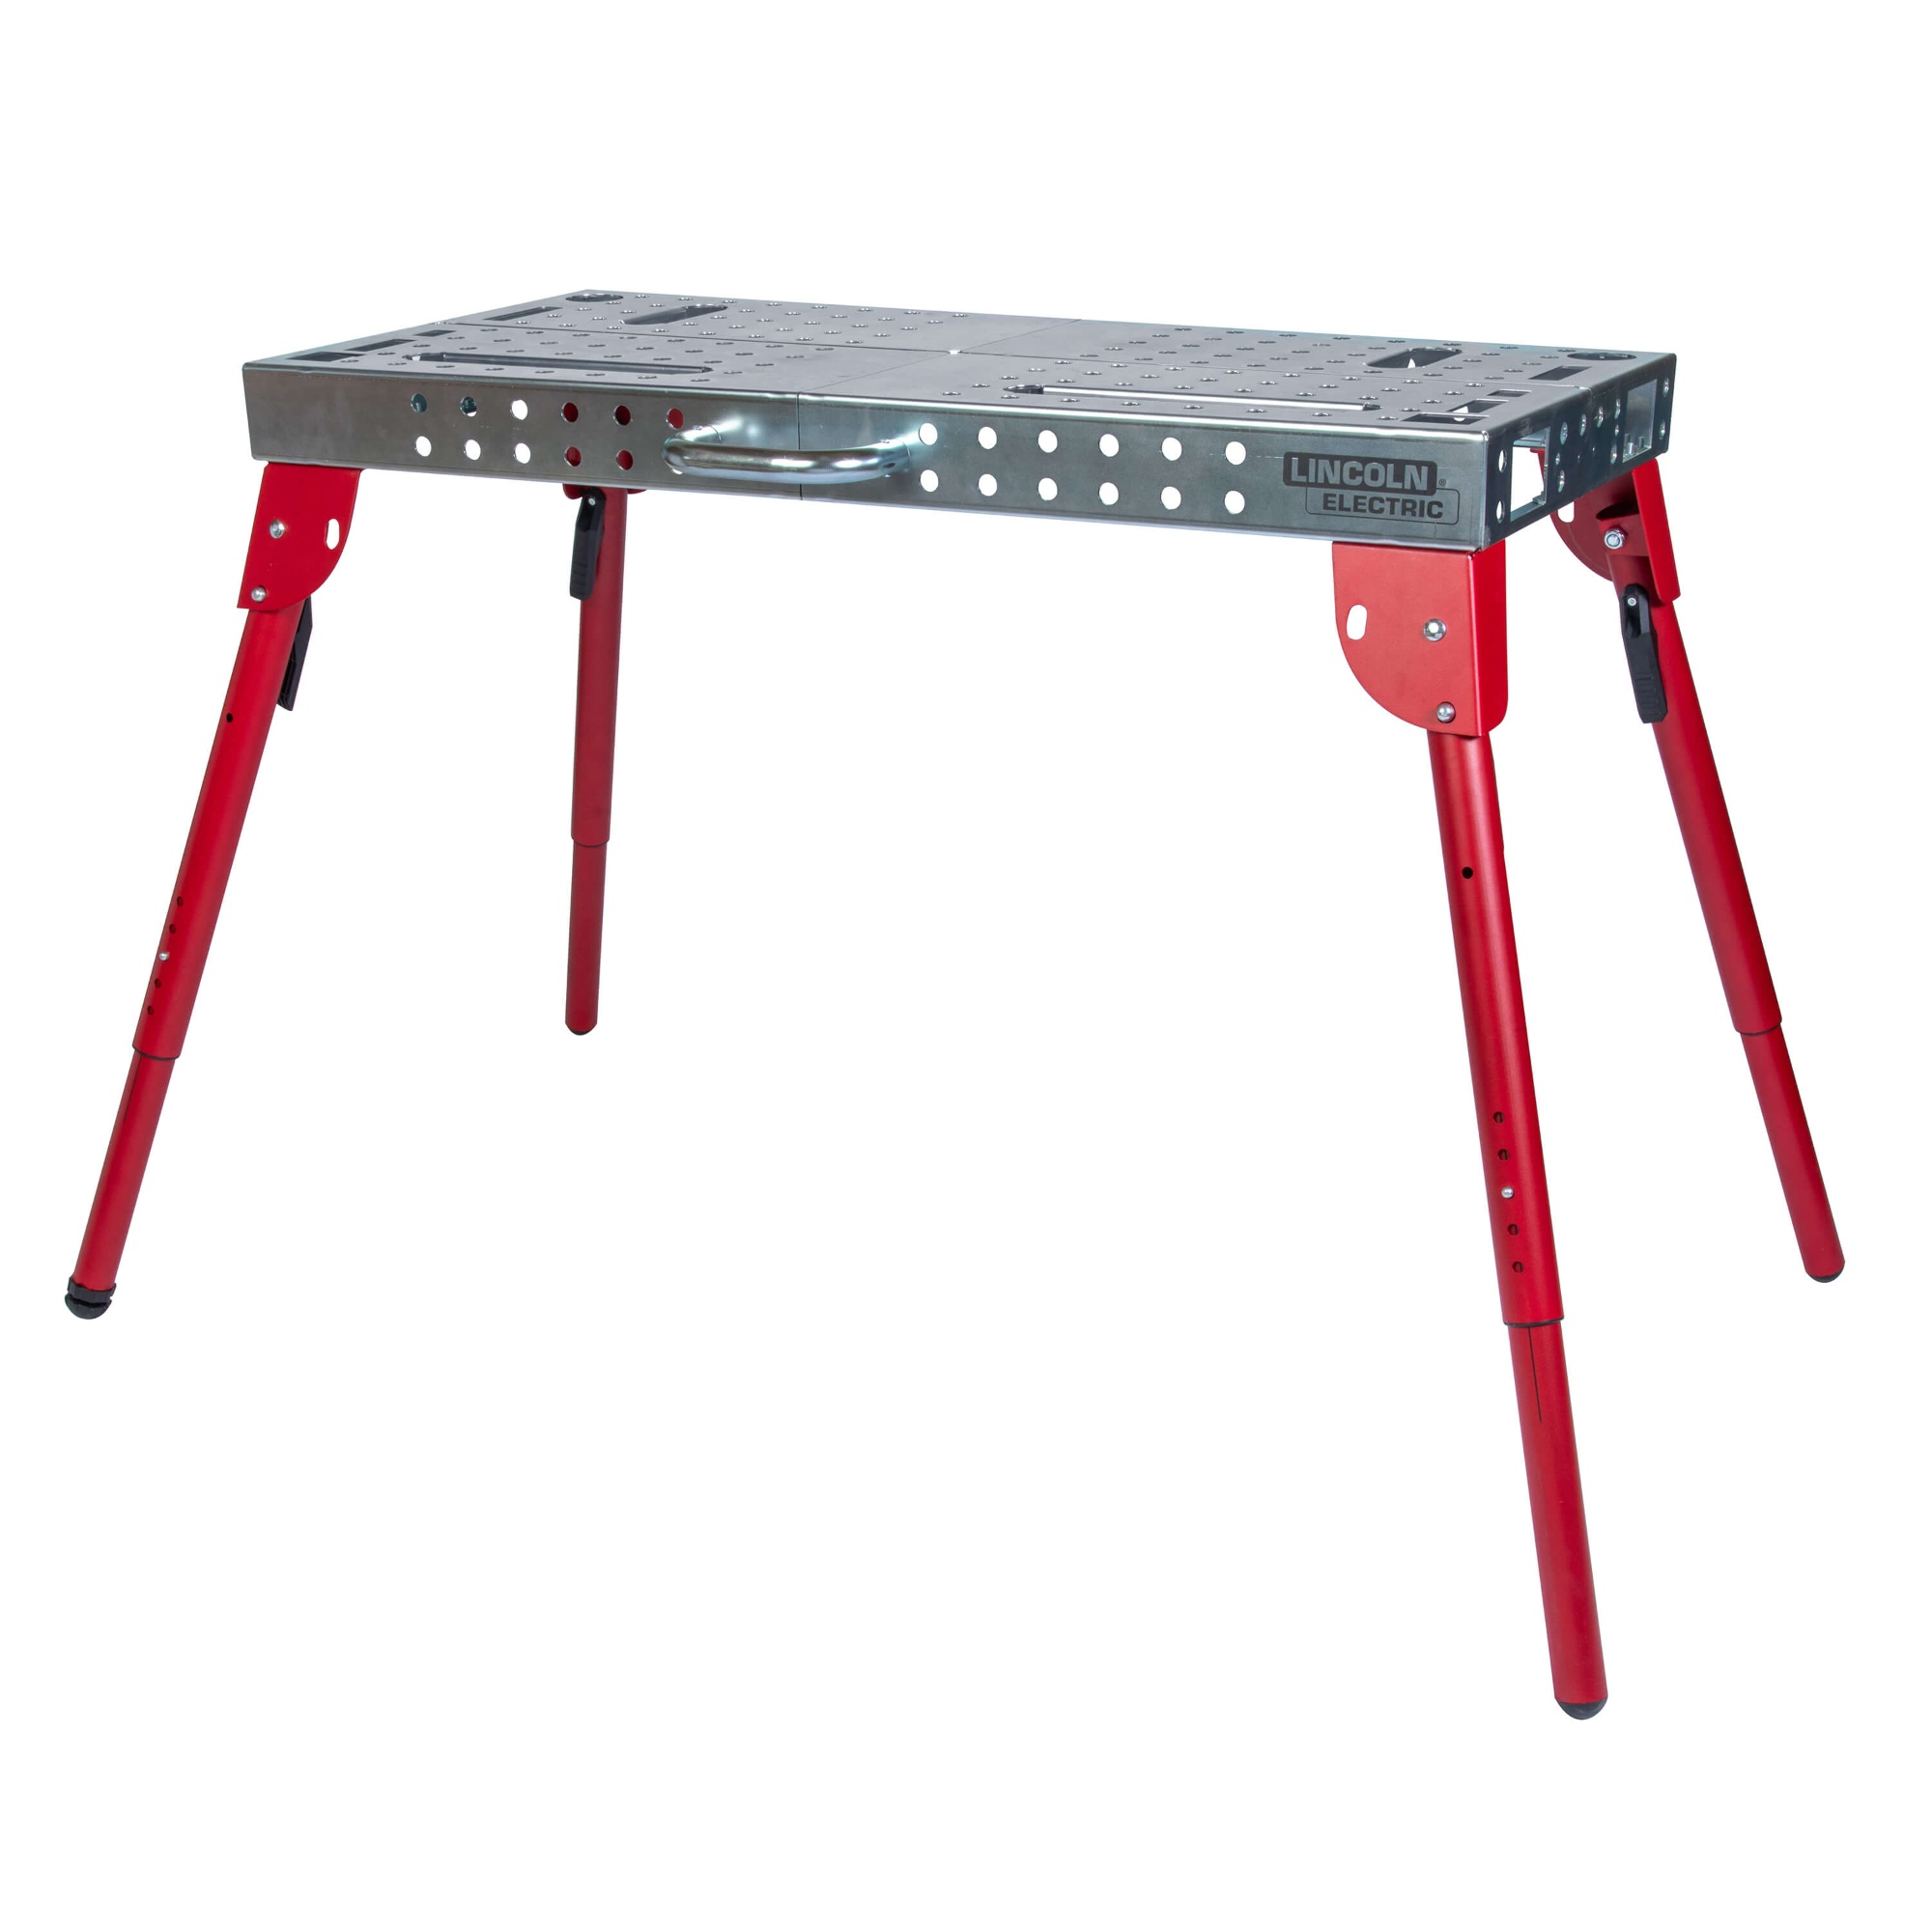 Lincoln Portable Welding Table and Workbench